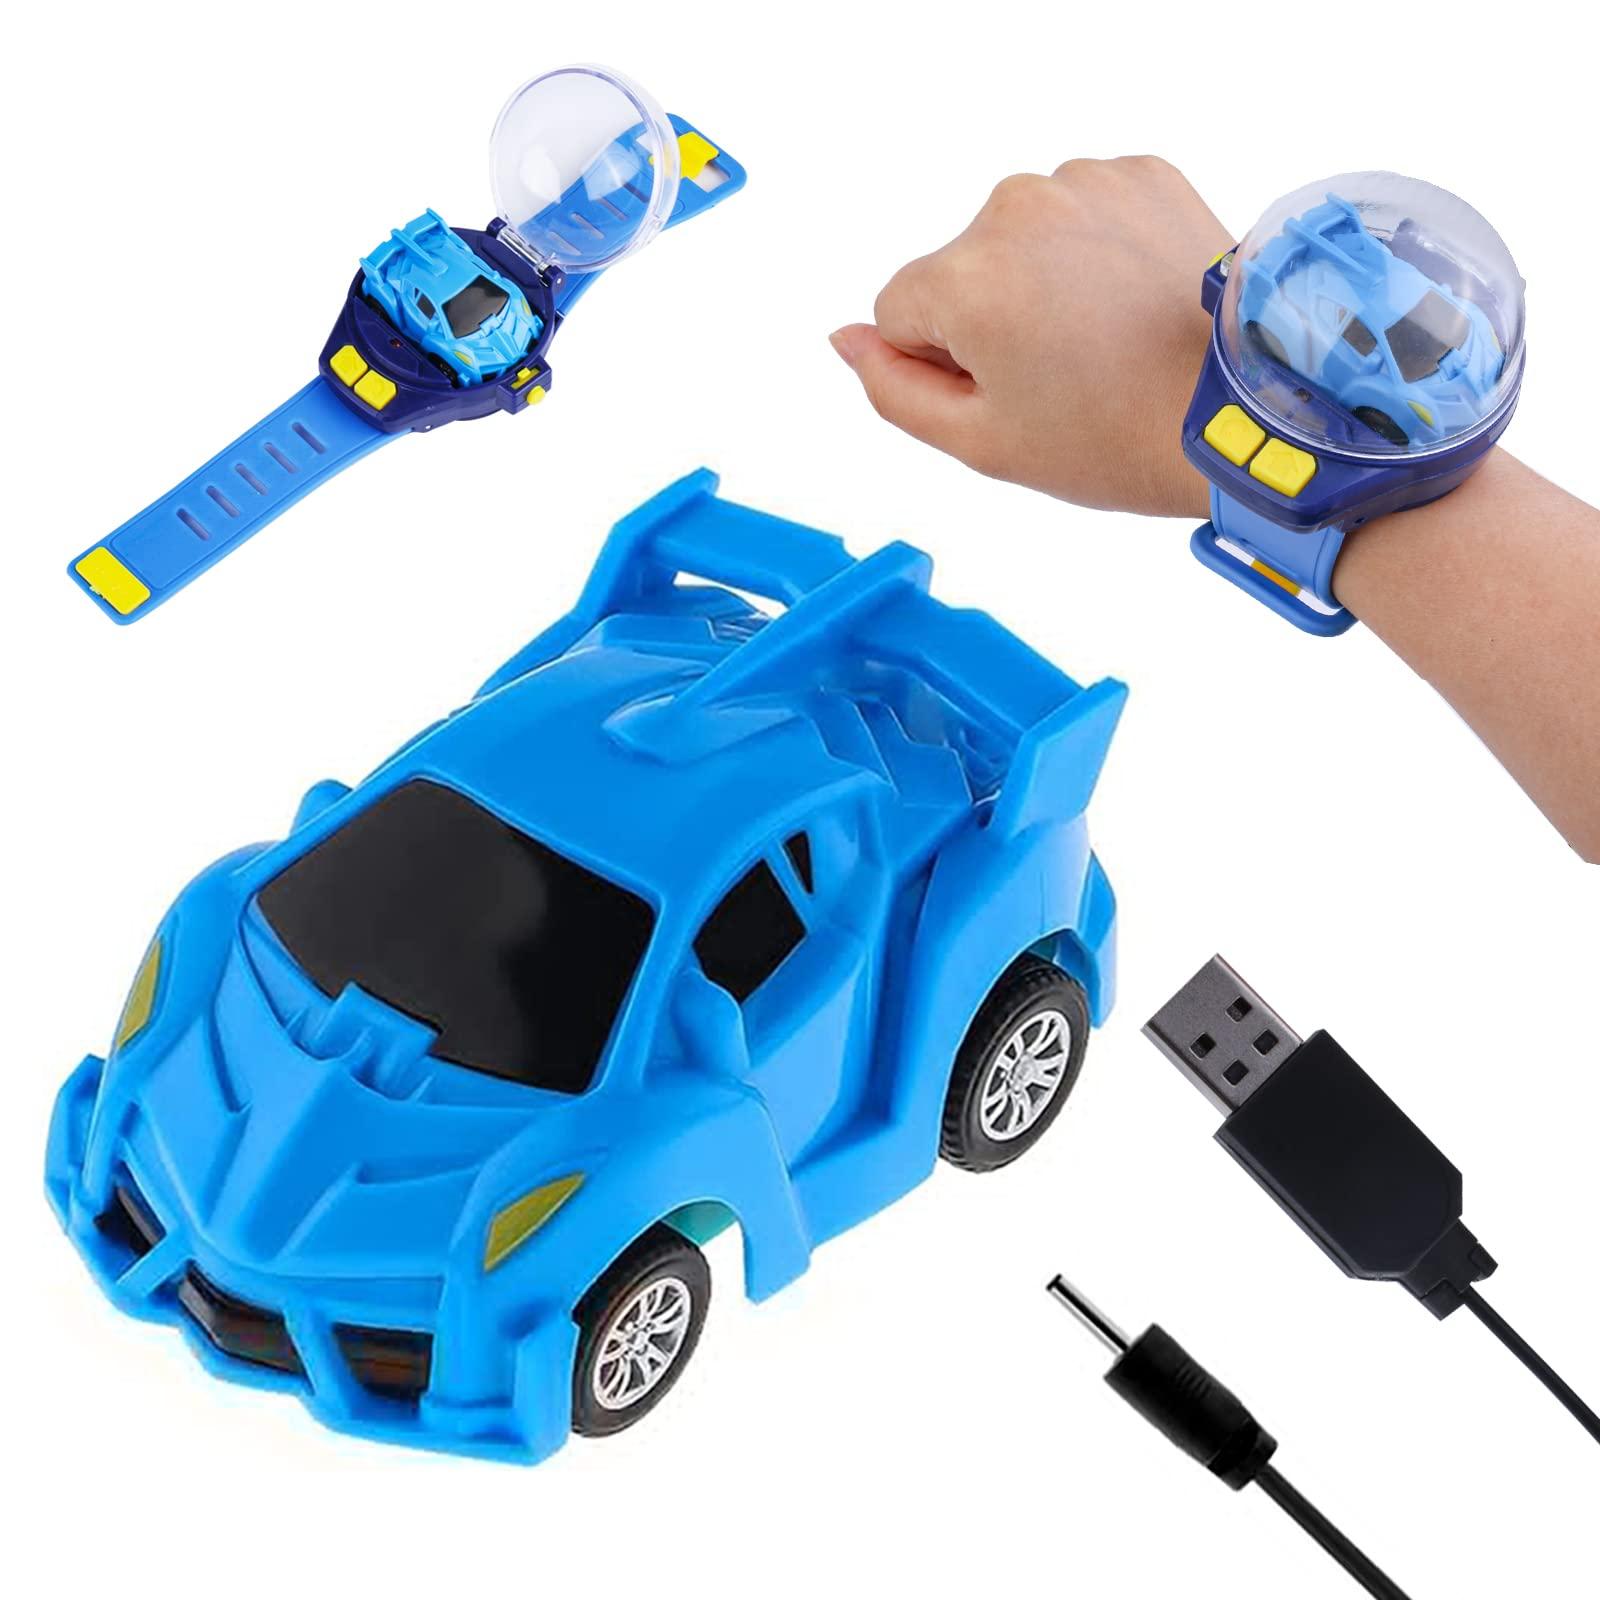 Watch Remote Car Toy:  The finish_reason Affordable and accessible watch remote car toys for kids of all ages